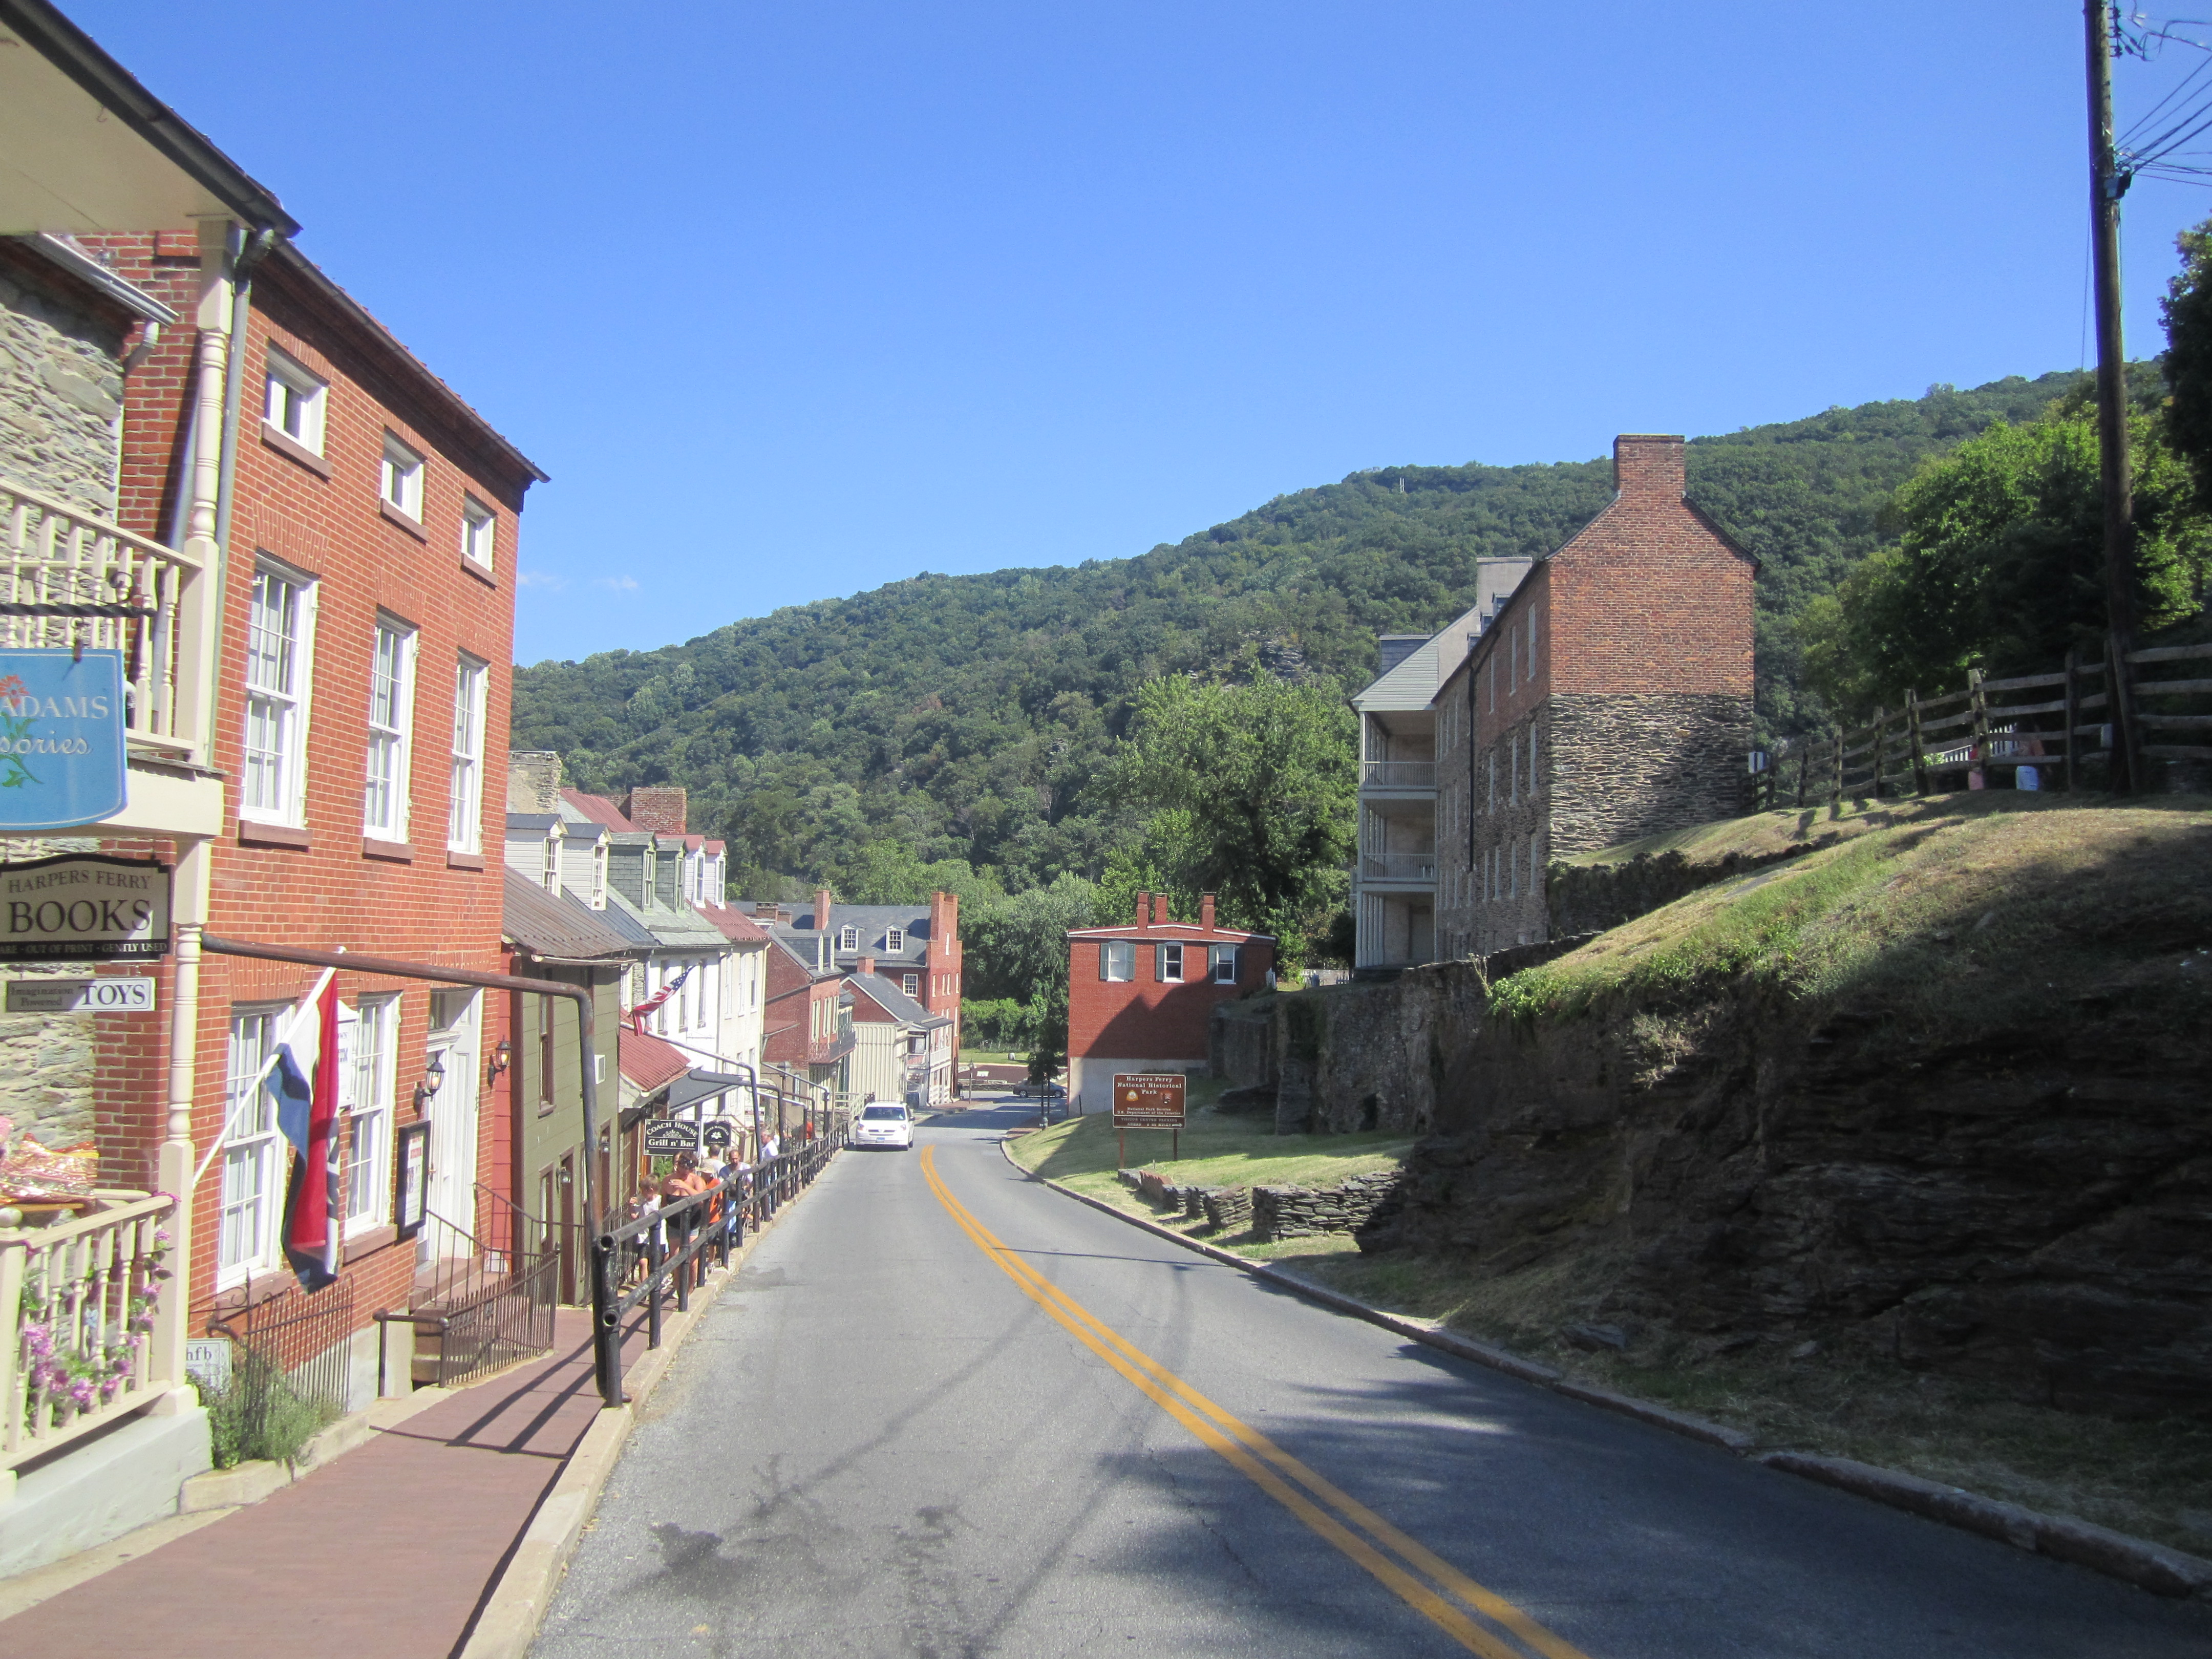 Inside Harpers Ferry, Harpers Ferry WV